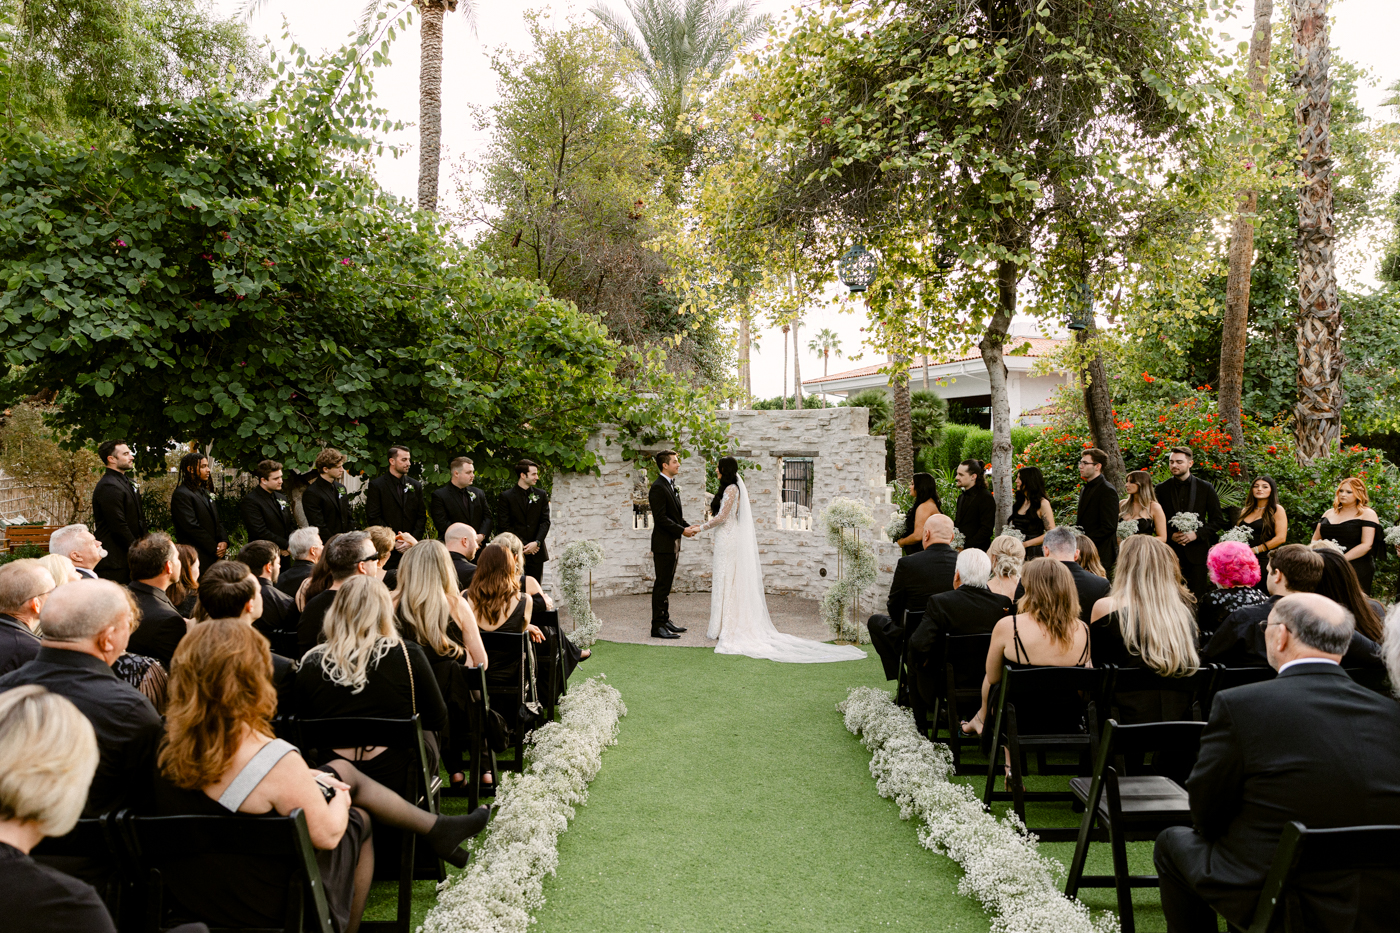 Ceremony at the scott resort and spa